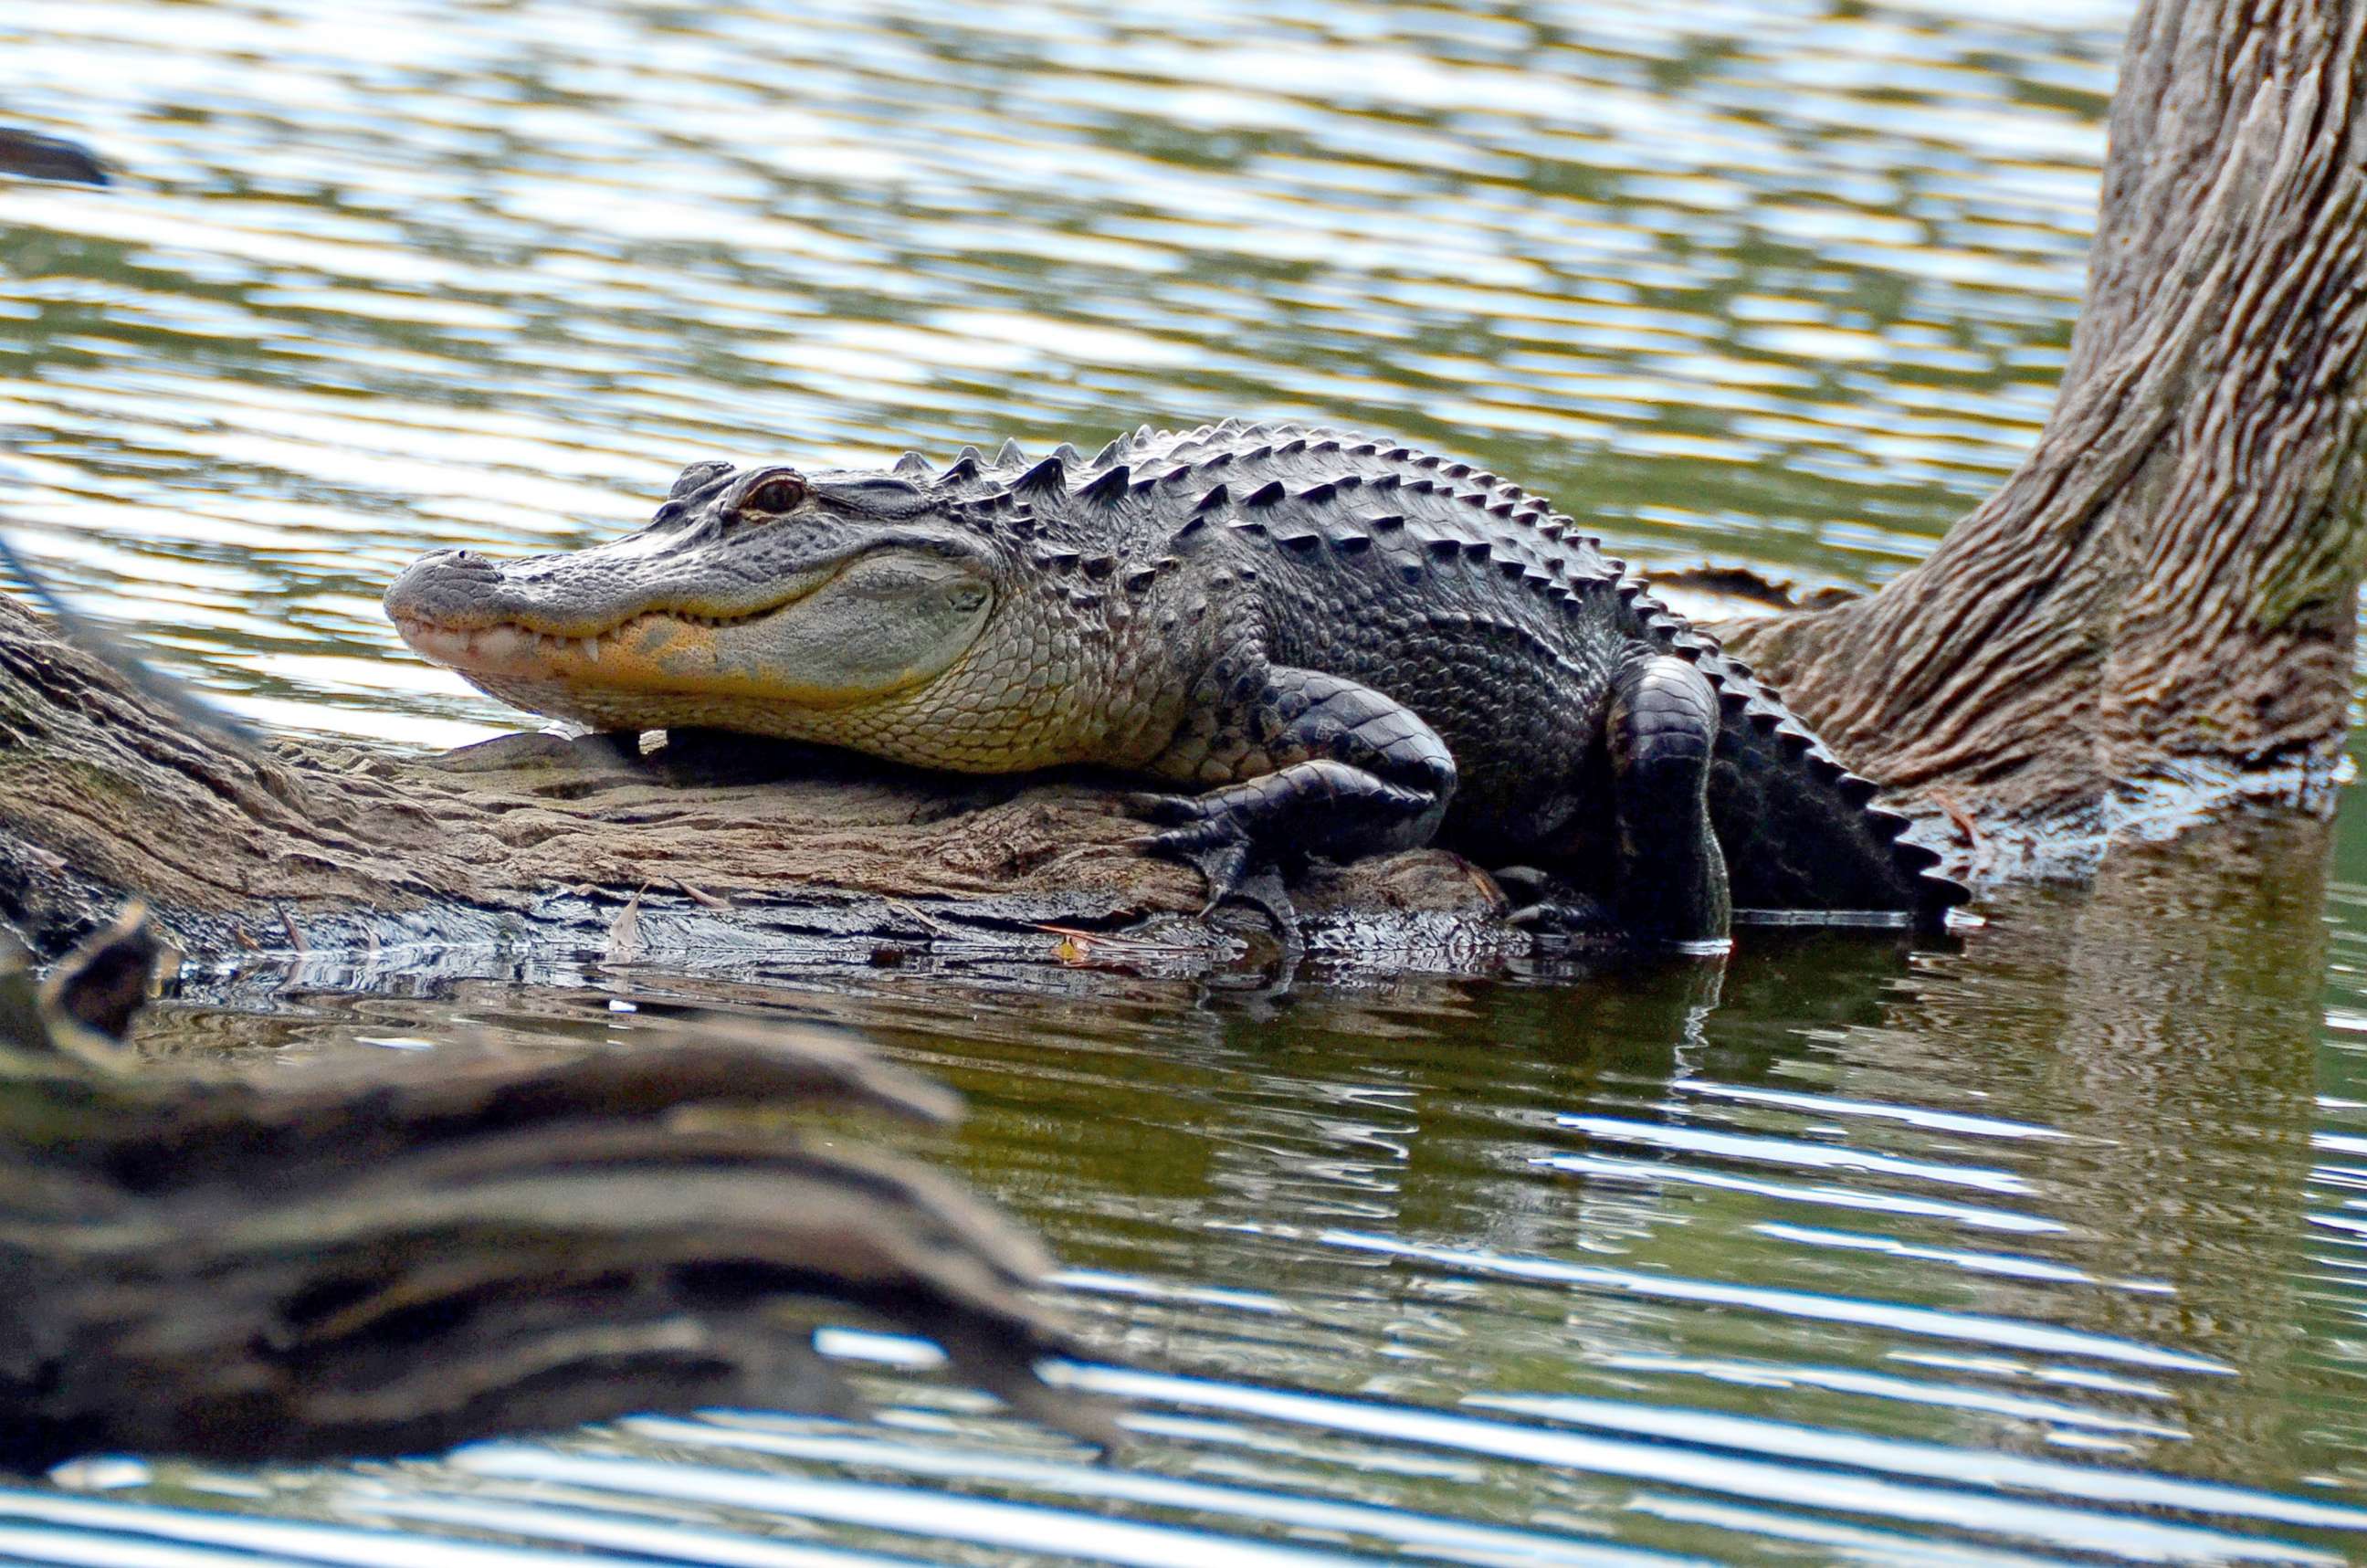 PHOTO: An alligator rests on a fallen tree in the Sea Pines Forest reserve on Hilton Head Island in this undated photo.